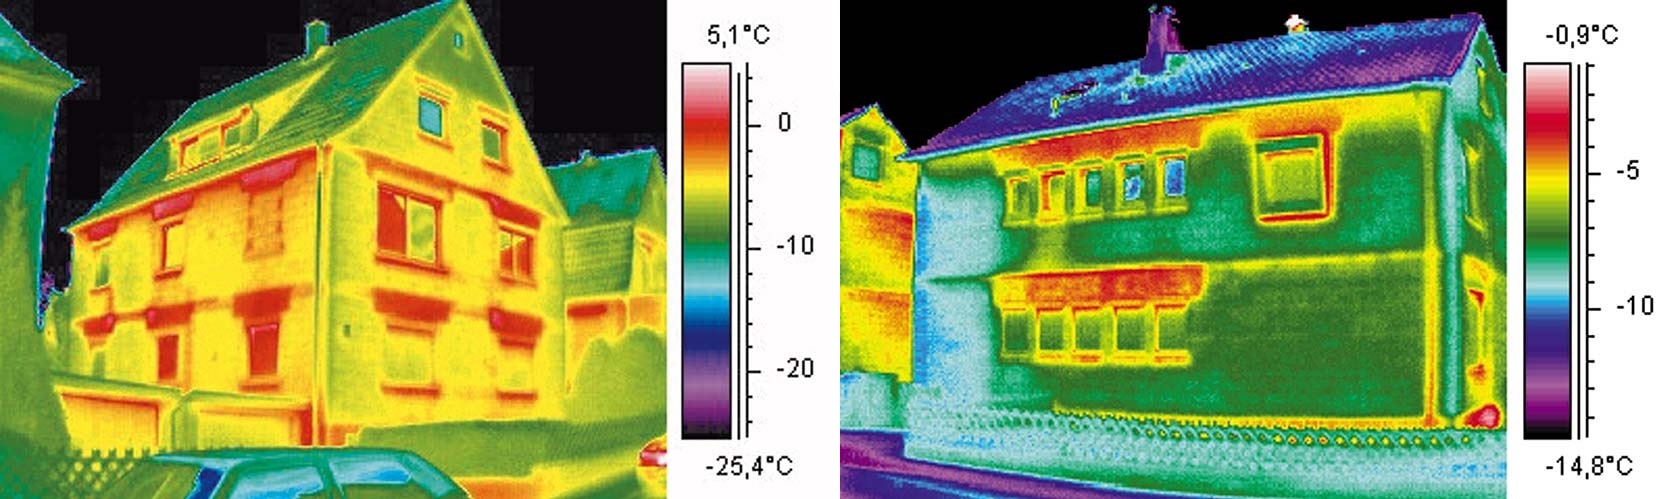 Thermography of two houses